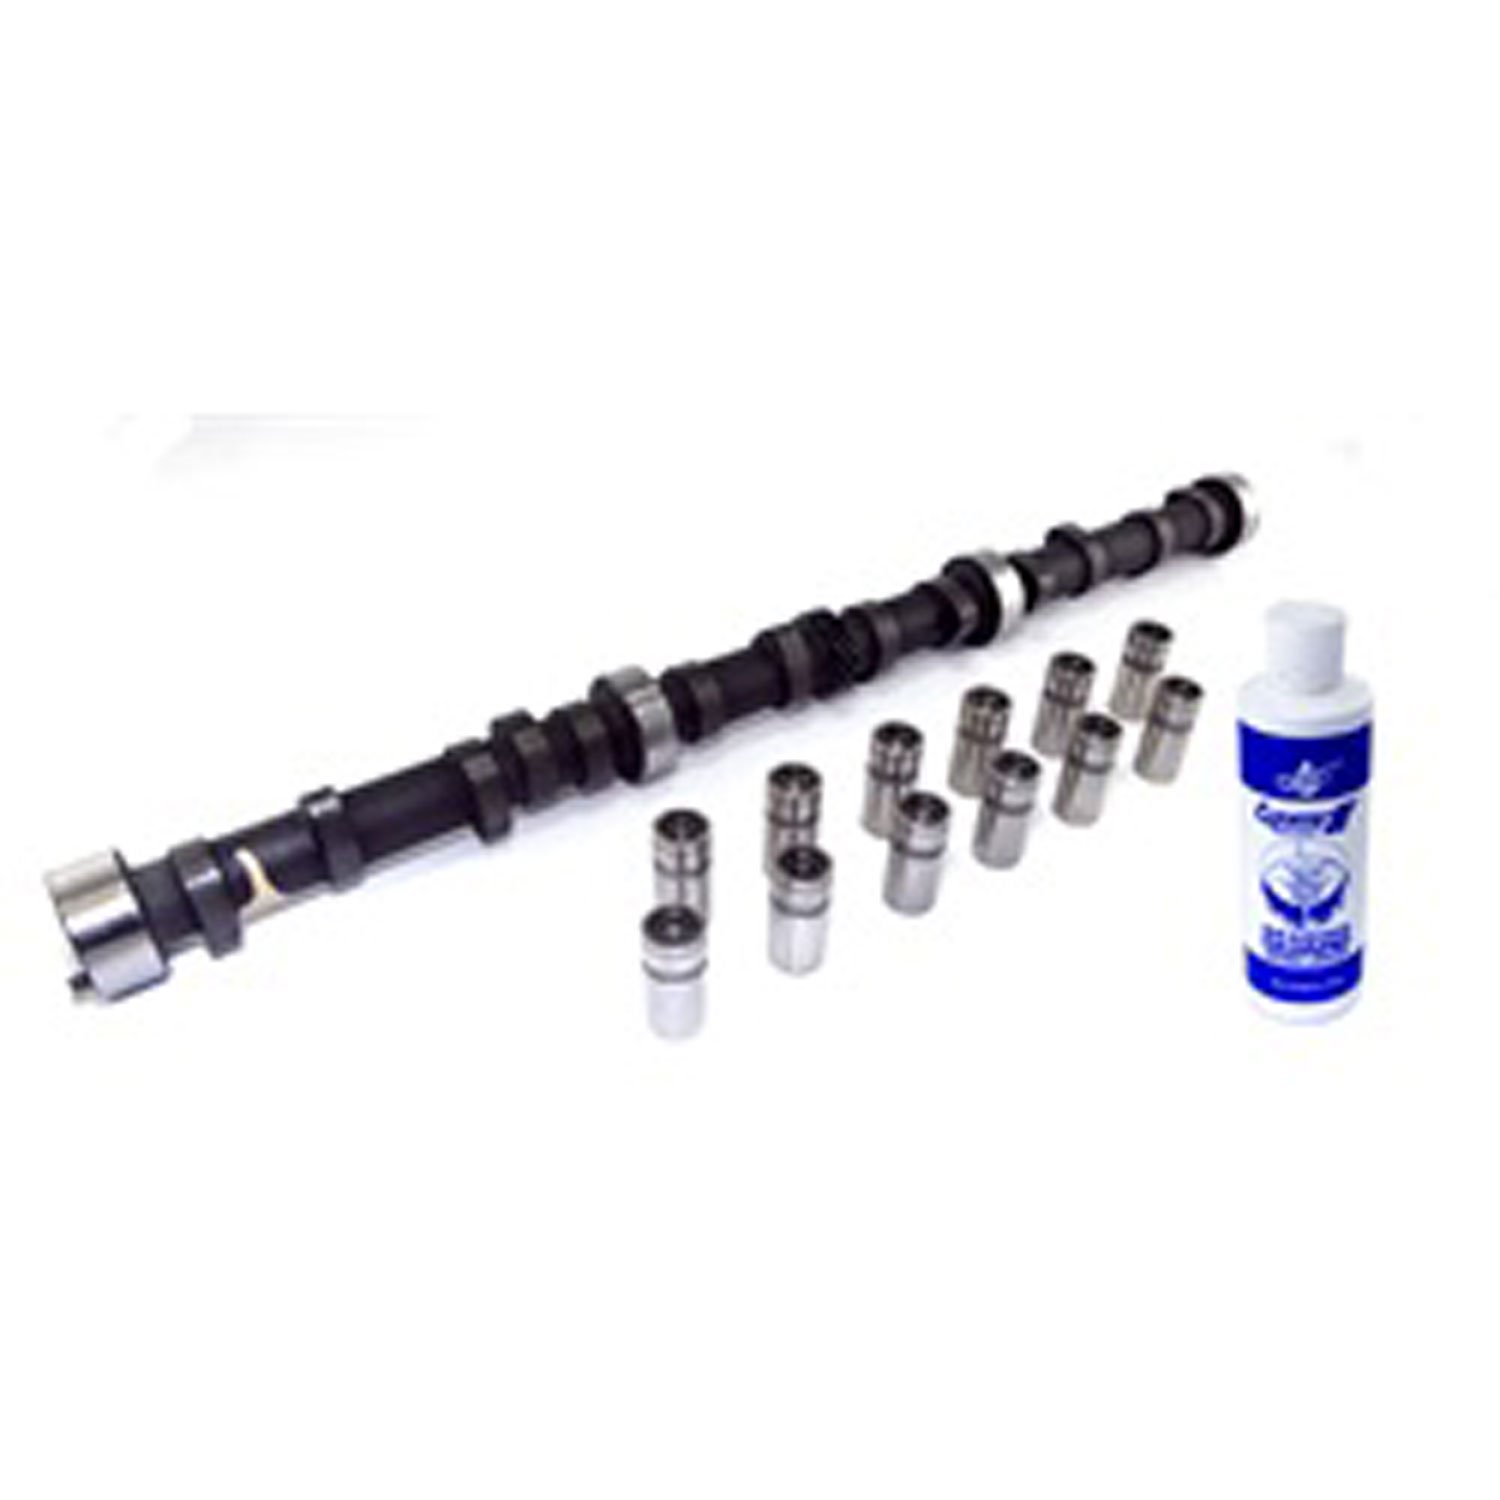 Camshaft Kit 4.2L Includes Camshaft Lube and Lifters 1979-1990 Models